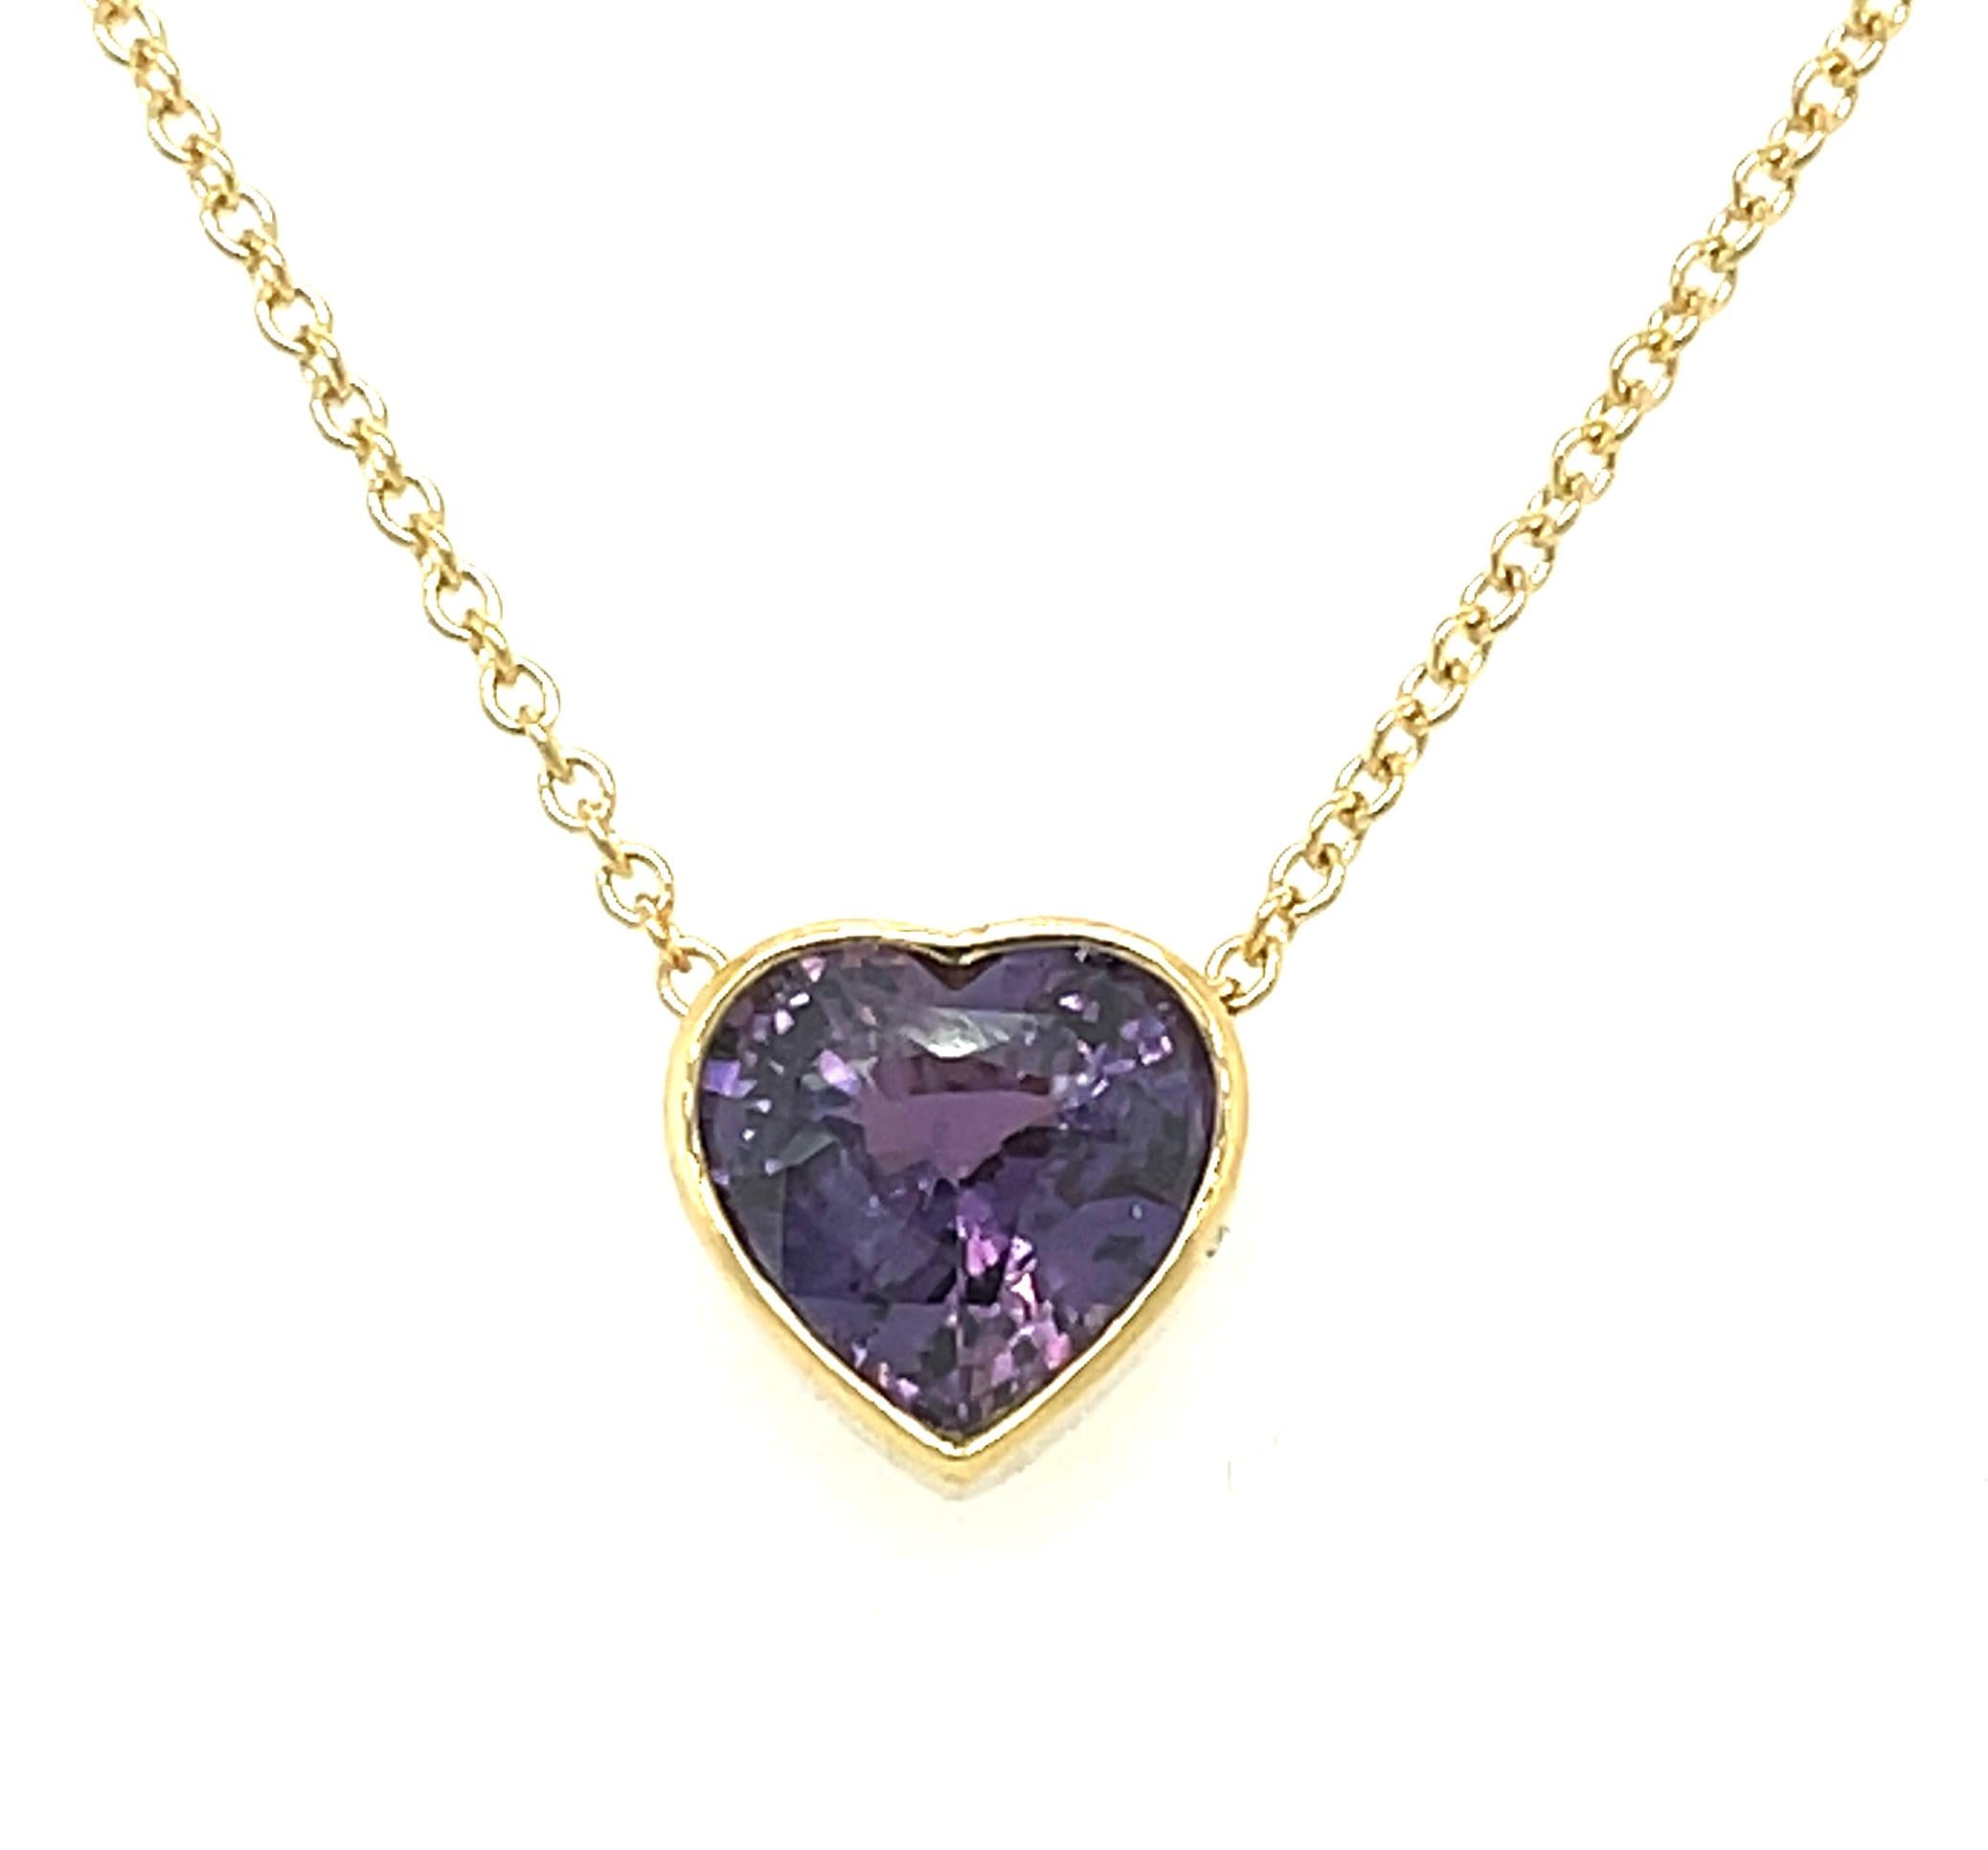 Artisan GIA Certified Unheated 3.56 Carat Purple Sapphire Heart Necklace in 18k Gold For Sale